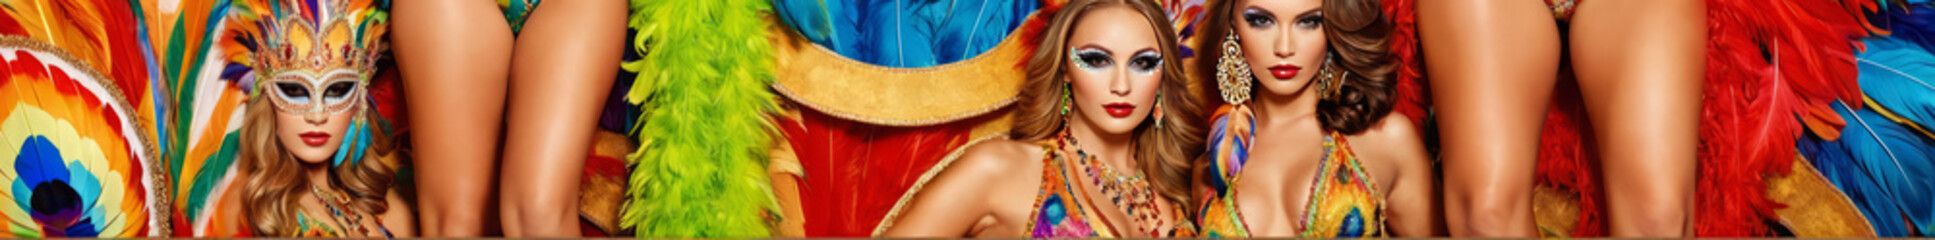 Vibrant Carnival Extravaganza: Captivating Portrait of a Group of Seductive Women in Colorful Sumptuous Feather Suits and Carnival Costumes - Sensual Festive Atmosphere,  Exotic Beauty, Masquerade